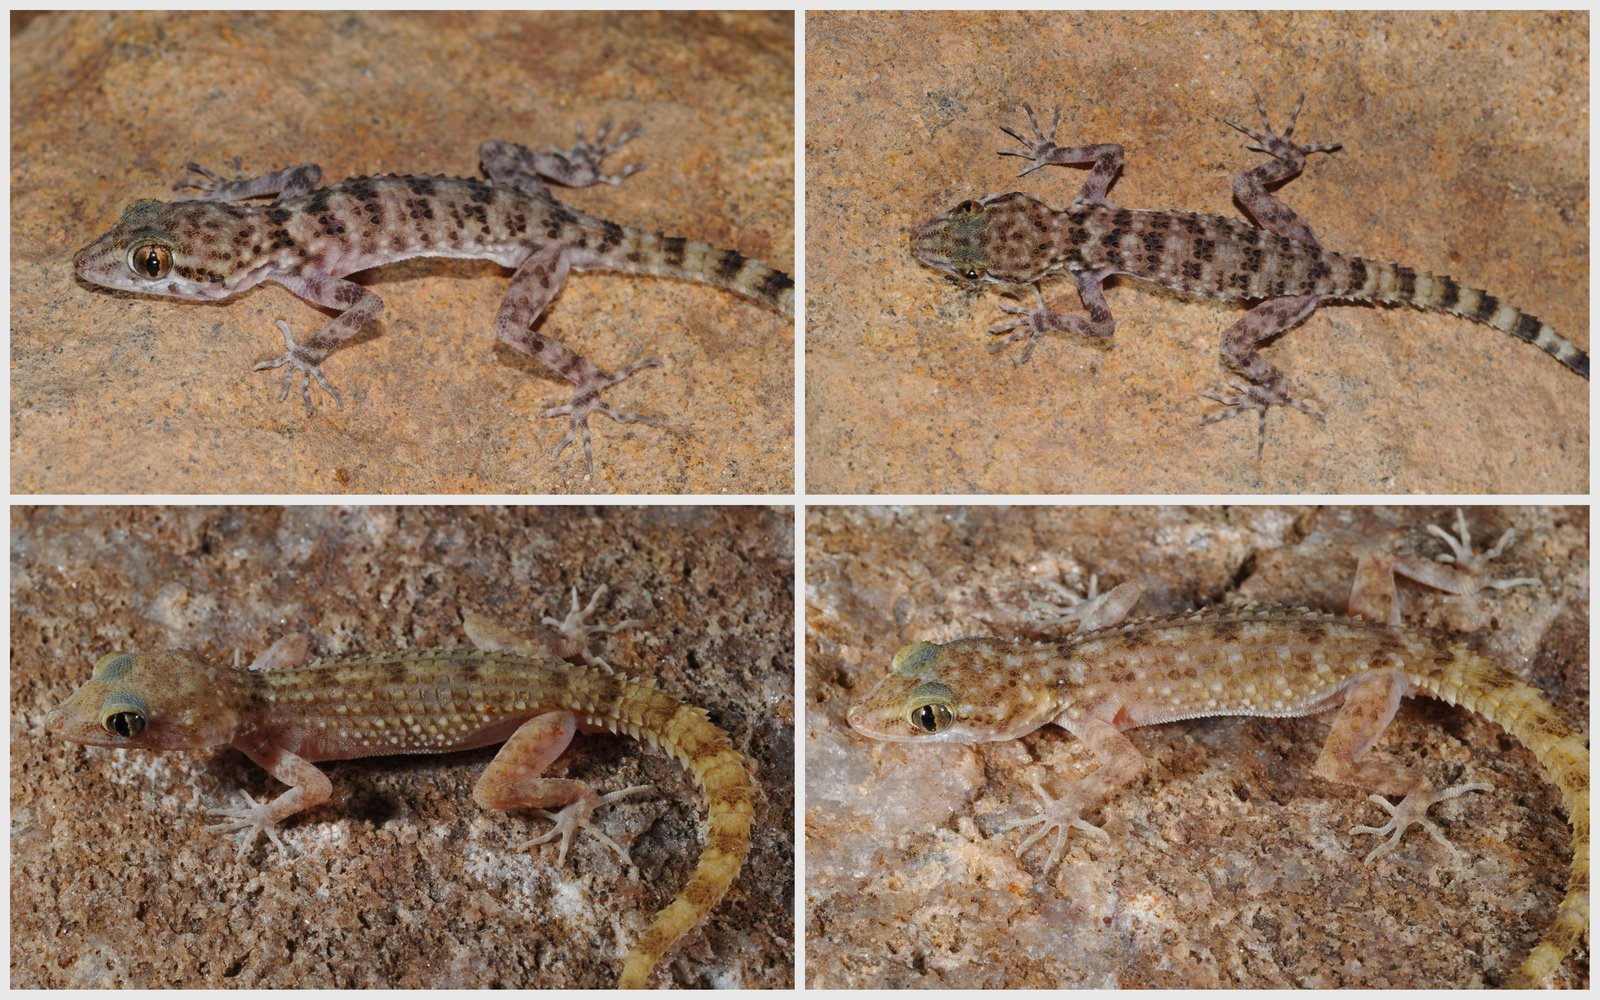 Examples&#x20;of&#x20;species&#x20;from&#x20;the&#x20;Cyrtopodion&#x20;group&#x20;that&#x20;look&#x20;very&#x20;similar&#x20;to&#x20;each&#x20;other